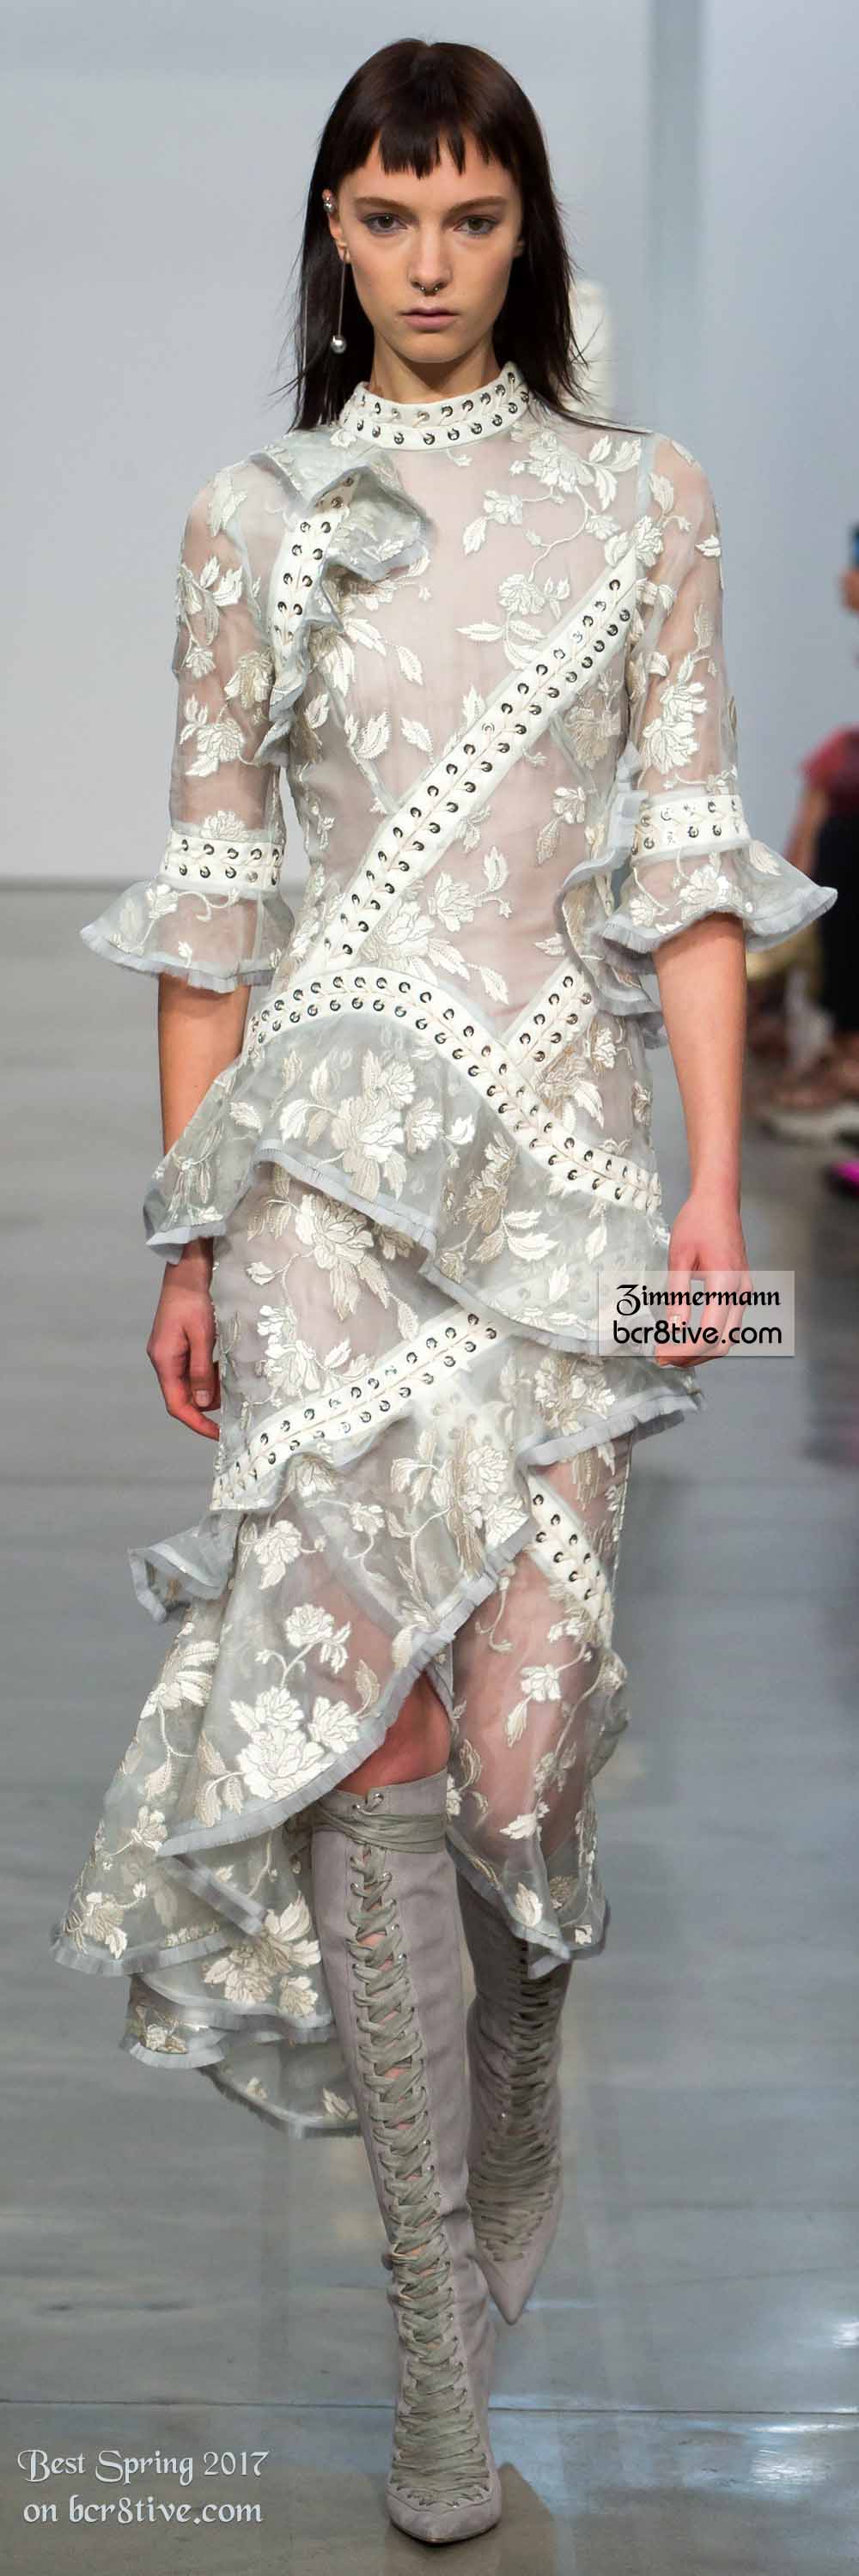 Zimmermann - The Best Looks from New York Fashion Week Spring 2017